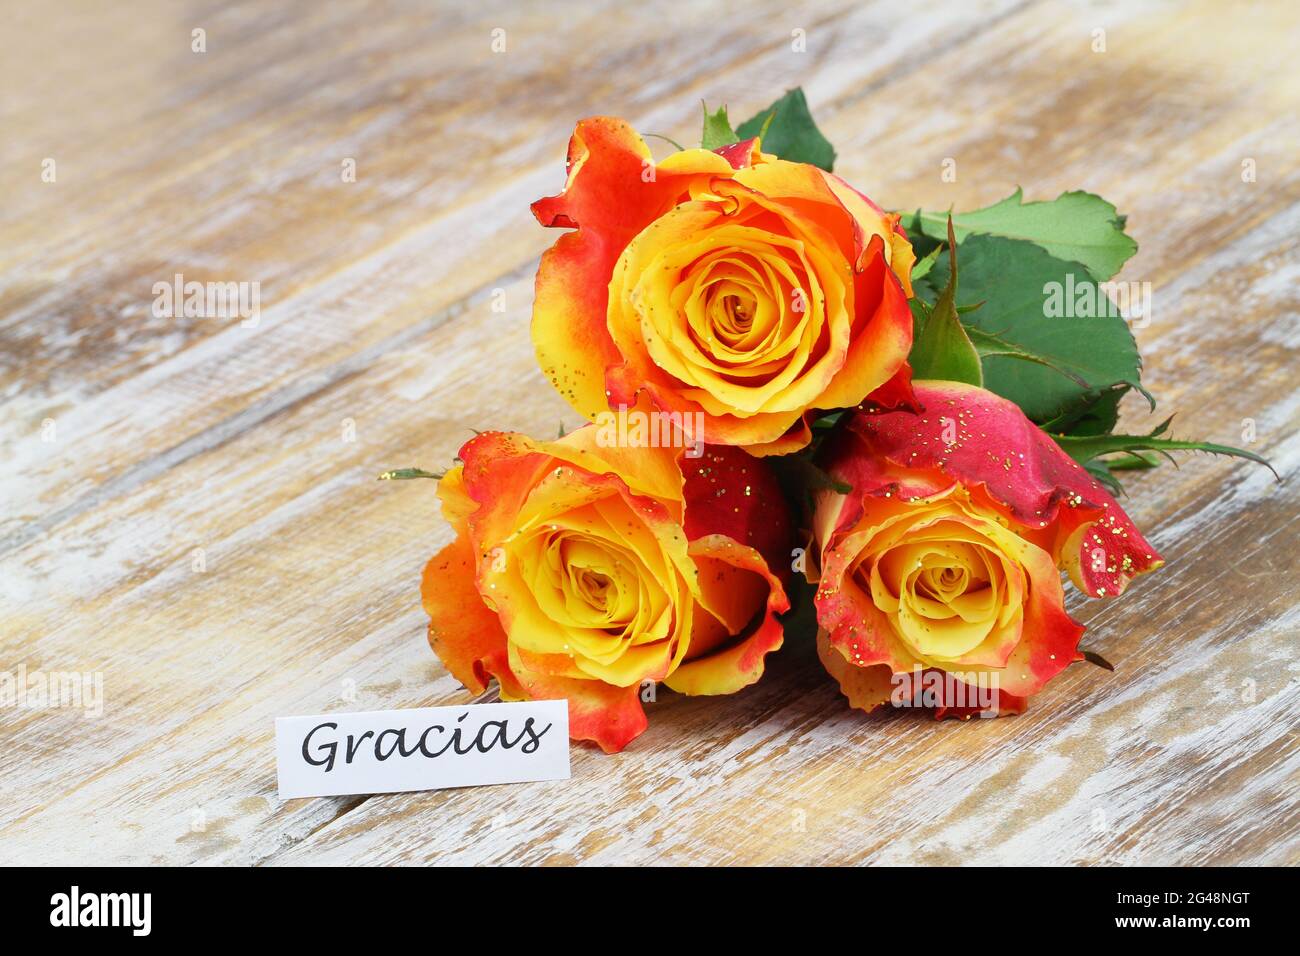 Gracias (thank you in Spanish) card with three beautiful colorful roses sprinkled with glitter on rustic wooden surface Stock Photo